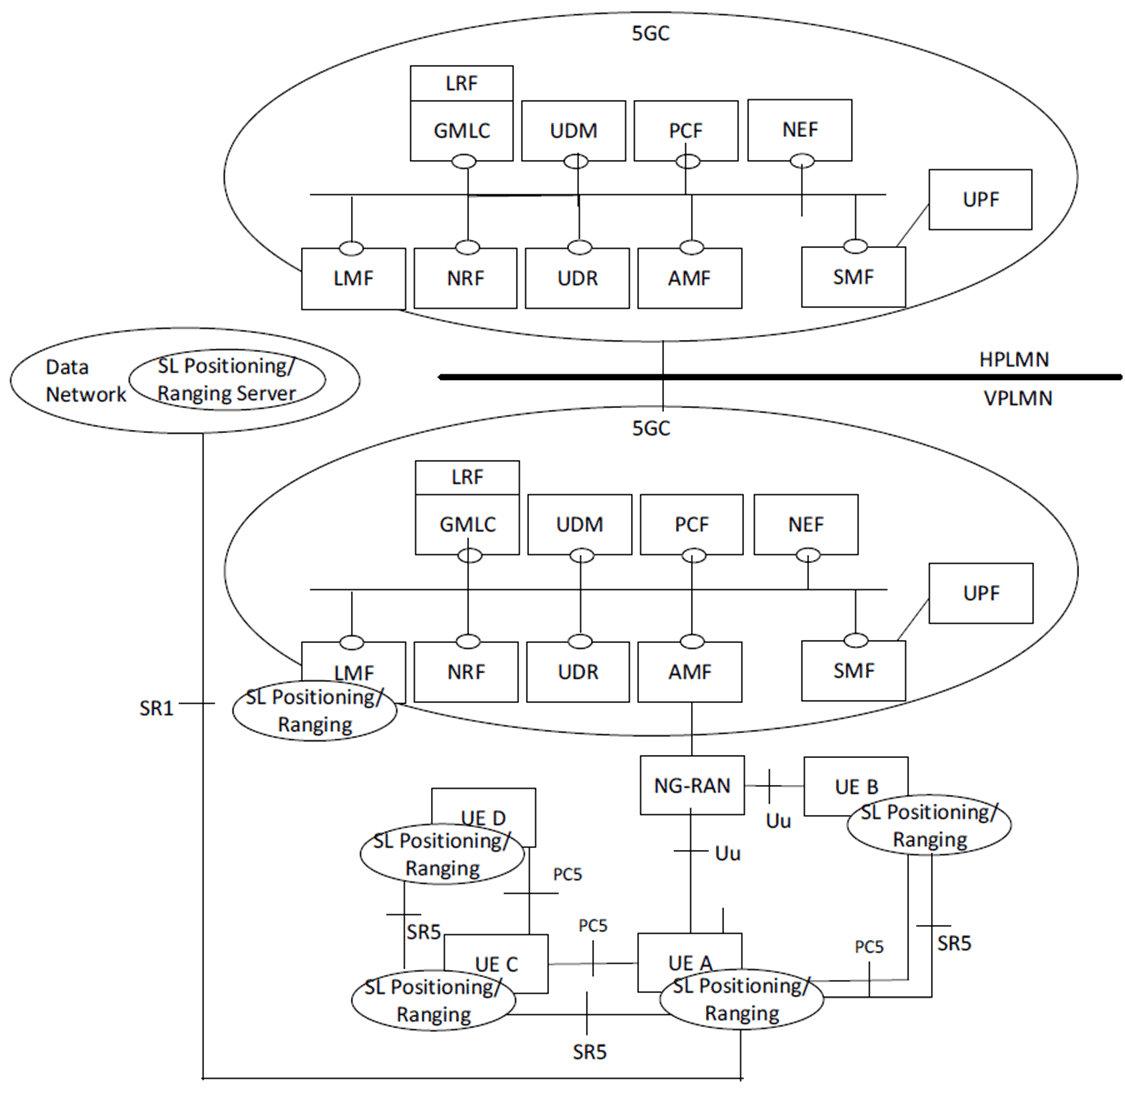 Copy of original 3GPP image for 3GPP TS 23.586, Fig. 4.2.2-1: Reference architecture for Ranging based services and Sidelink positioning for roaming and same PLMN operation